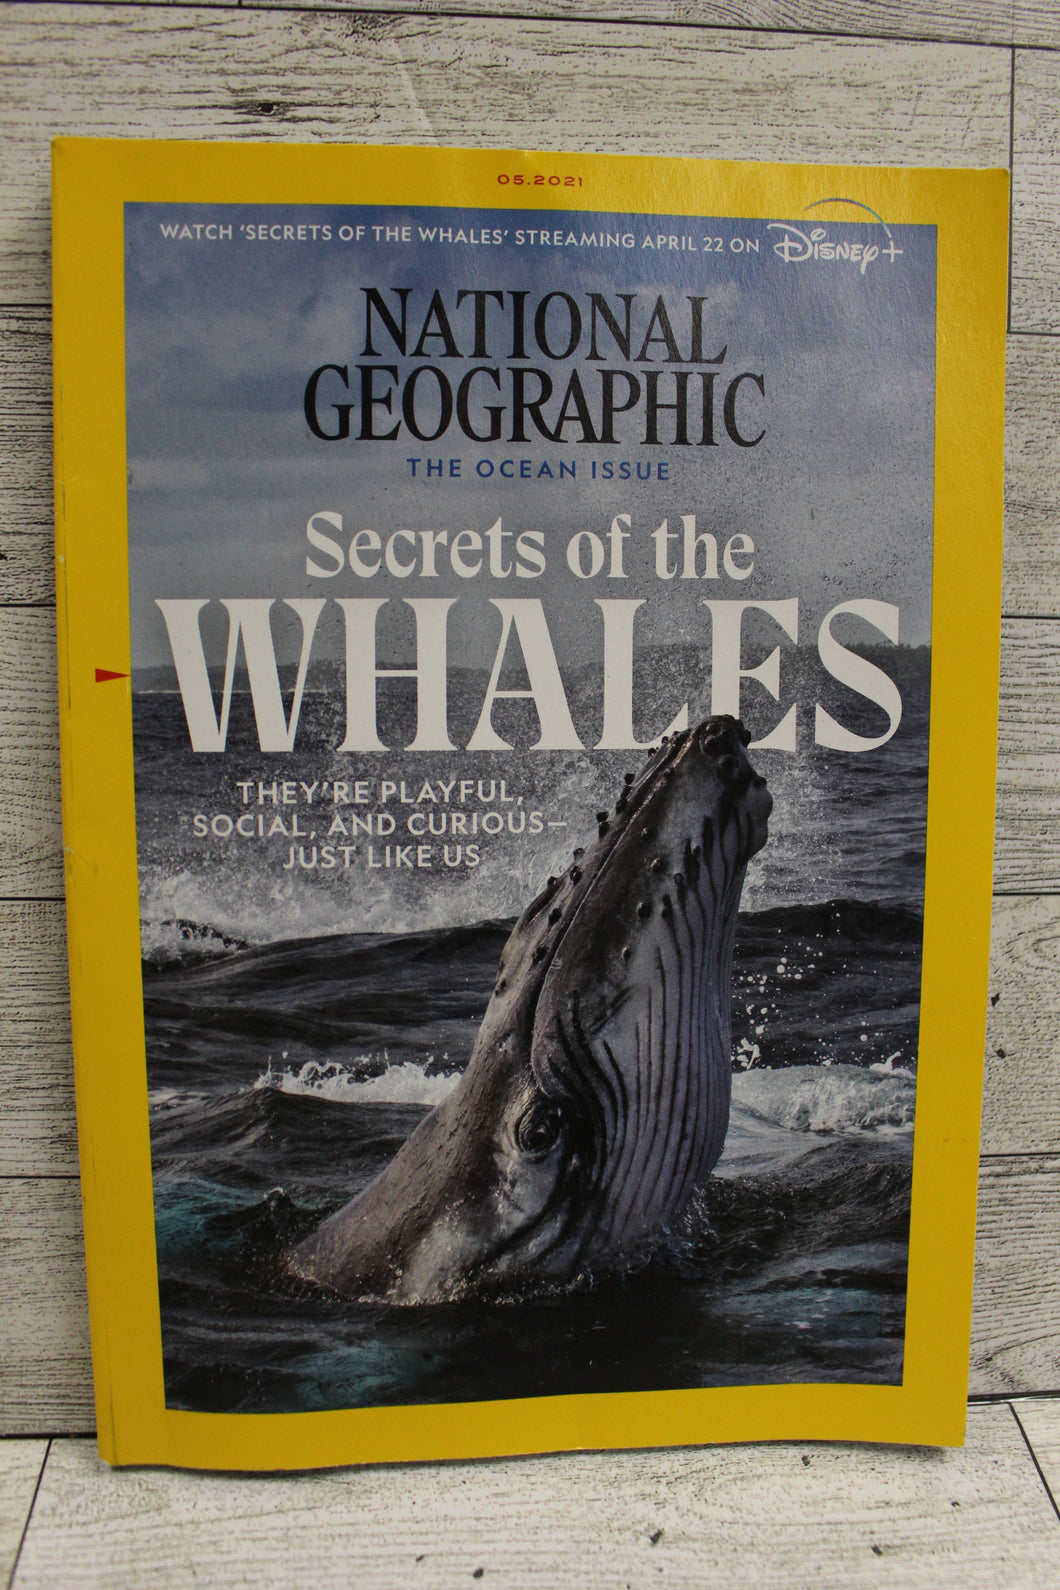 National Geographic The Ocean Issue Secrets Of The Whales -Used